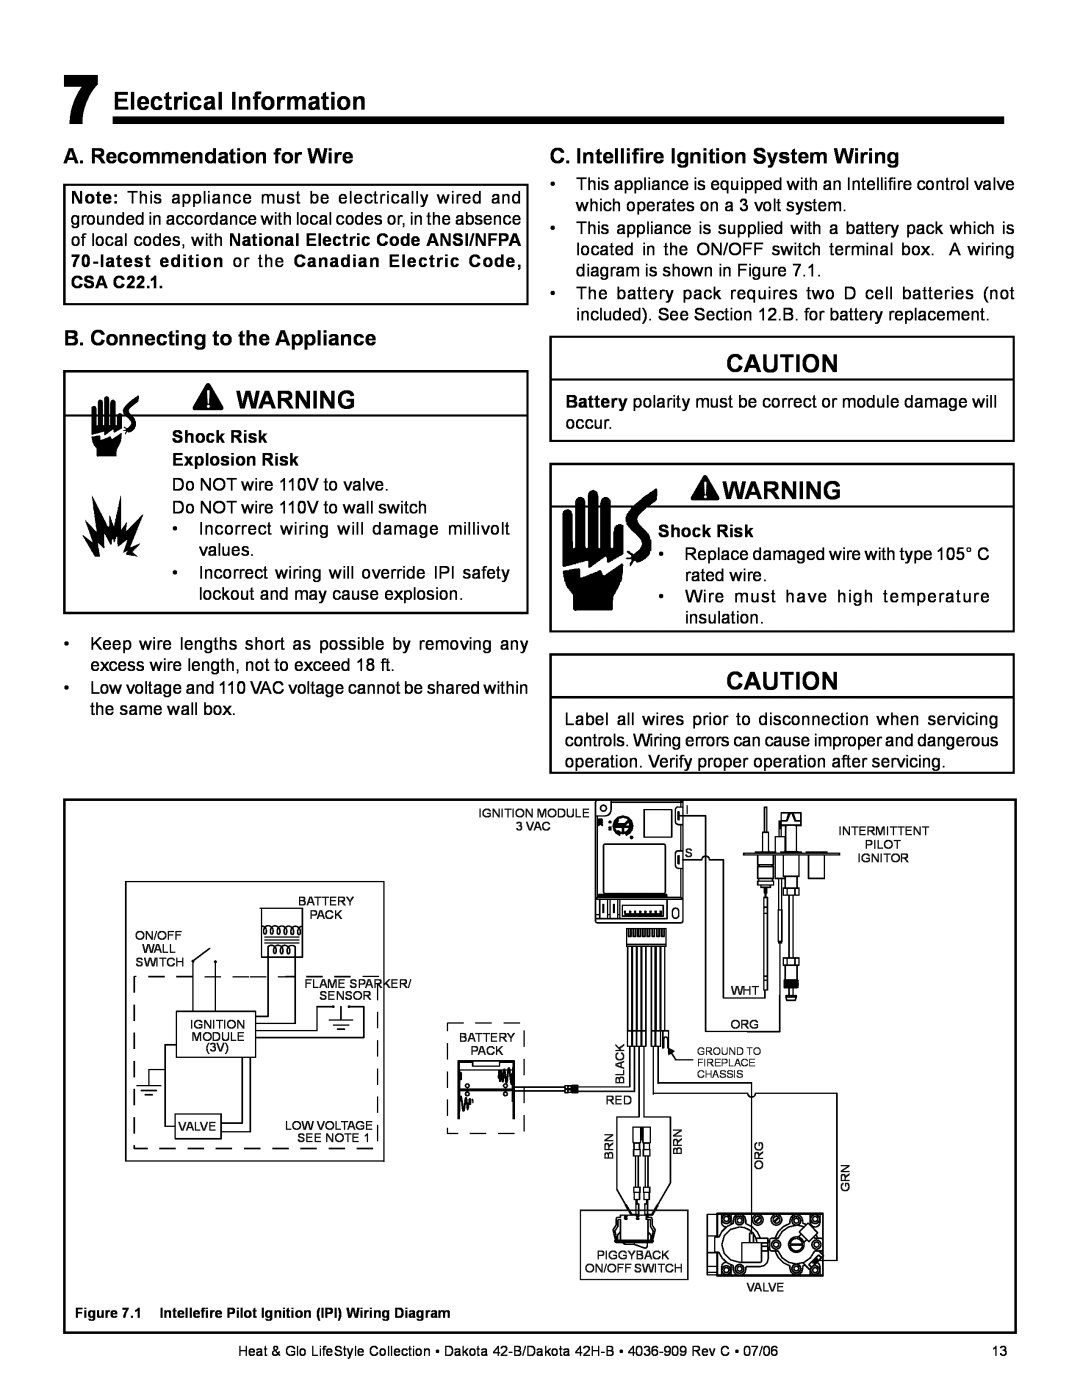 Heat & Glo LifeStyle Dakota 42-B Electrical Information, A. Recommendation for Wire, C. Intelliﬁre Ignition System Wiring 